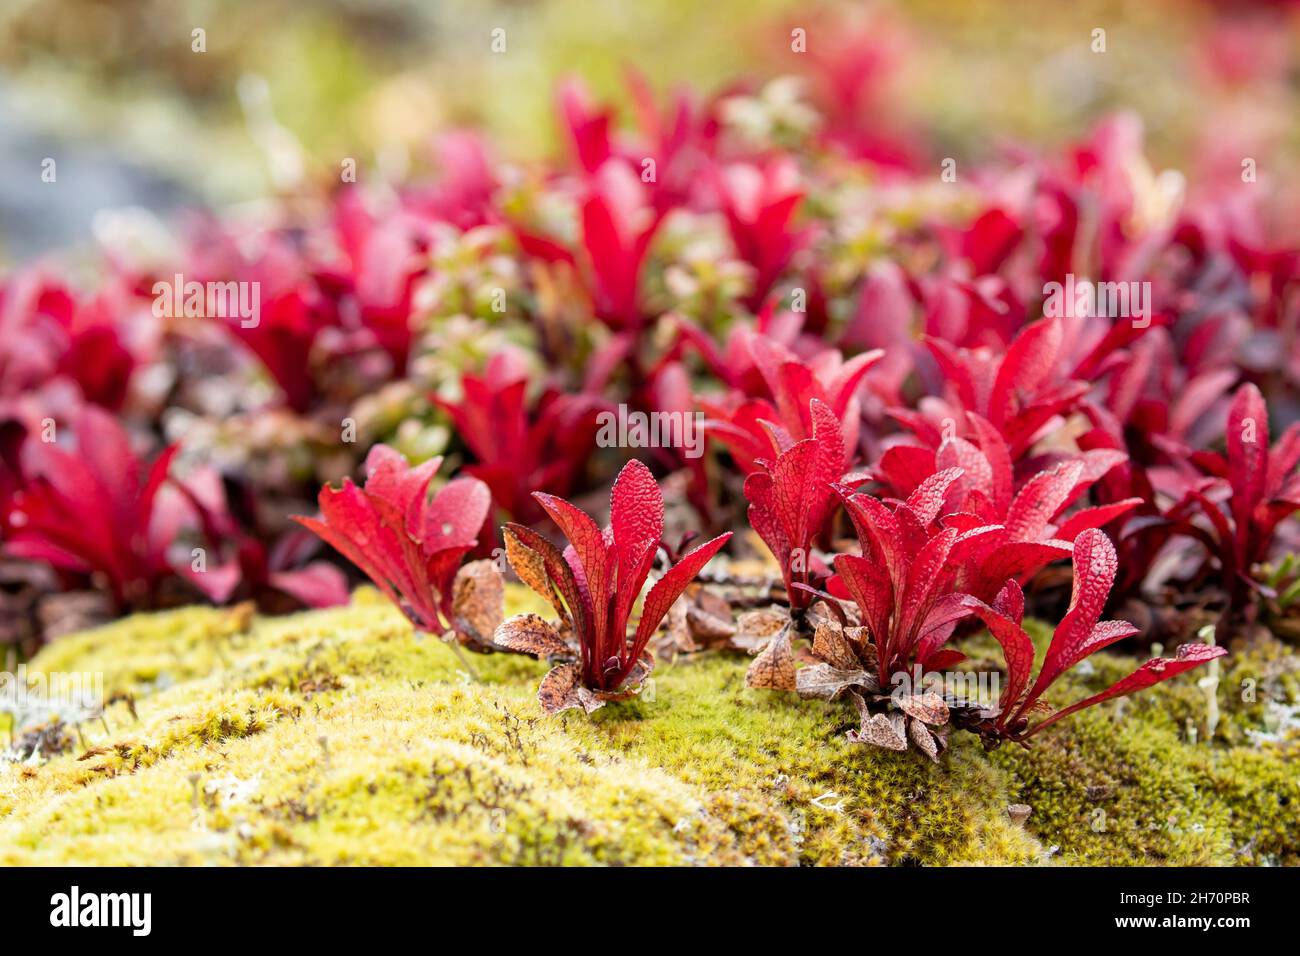 Bright red leaves of Alpine Bearberry (Arctous alpina, Arctostaphylos alpina) growing on a mossy stone during  autumn foliage in Northern Finland natu Stock Photo